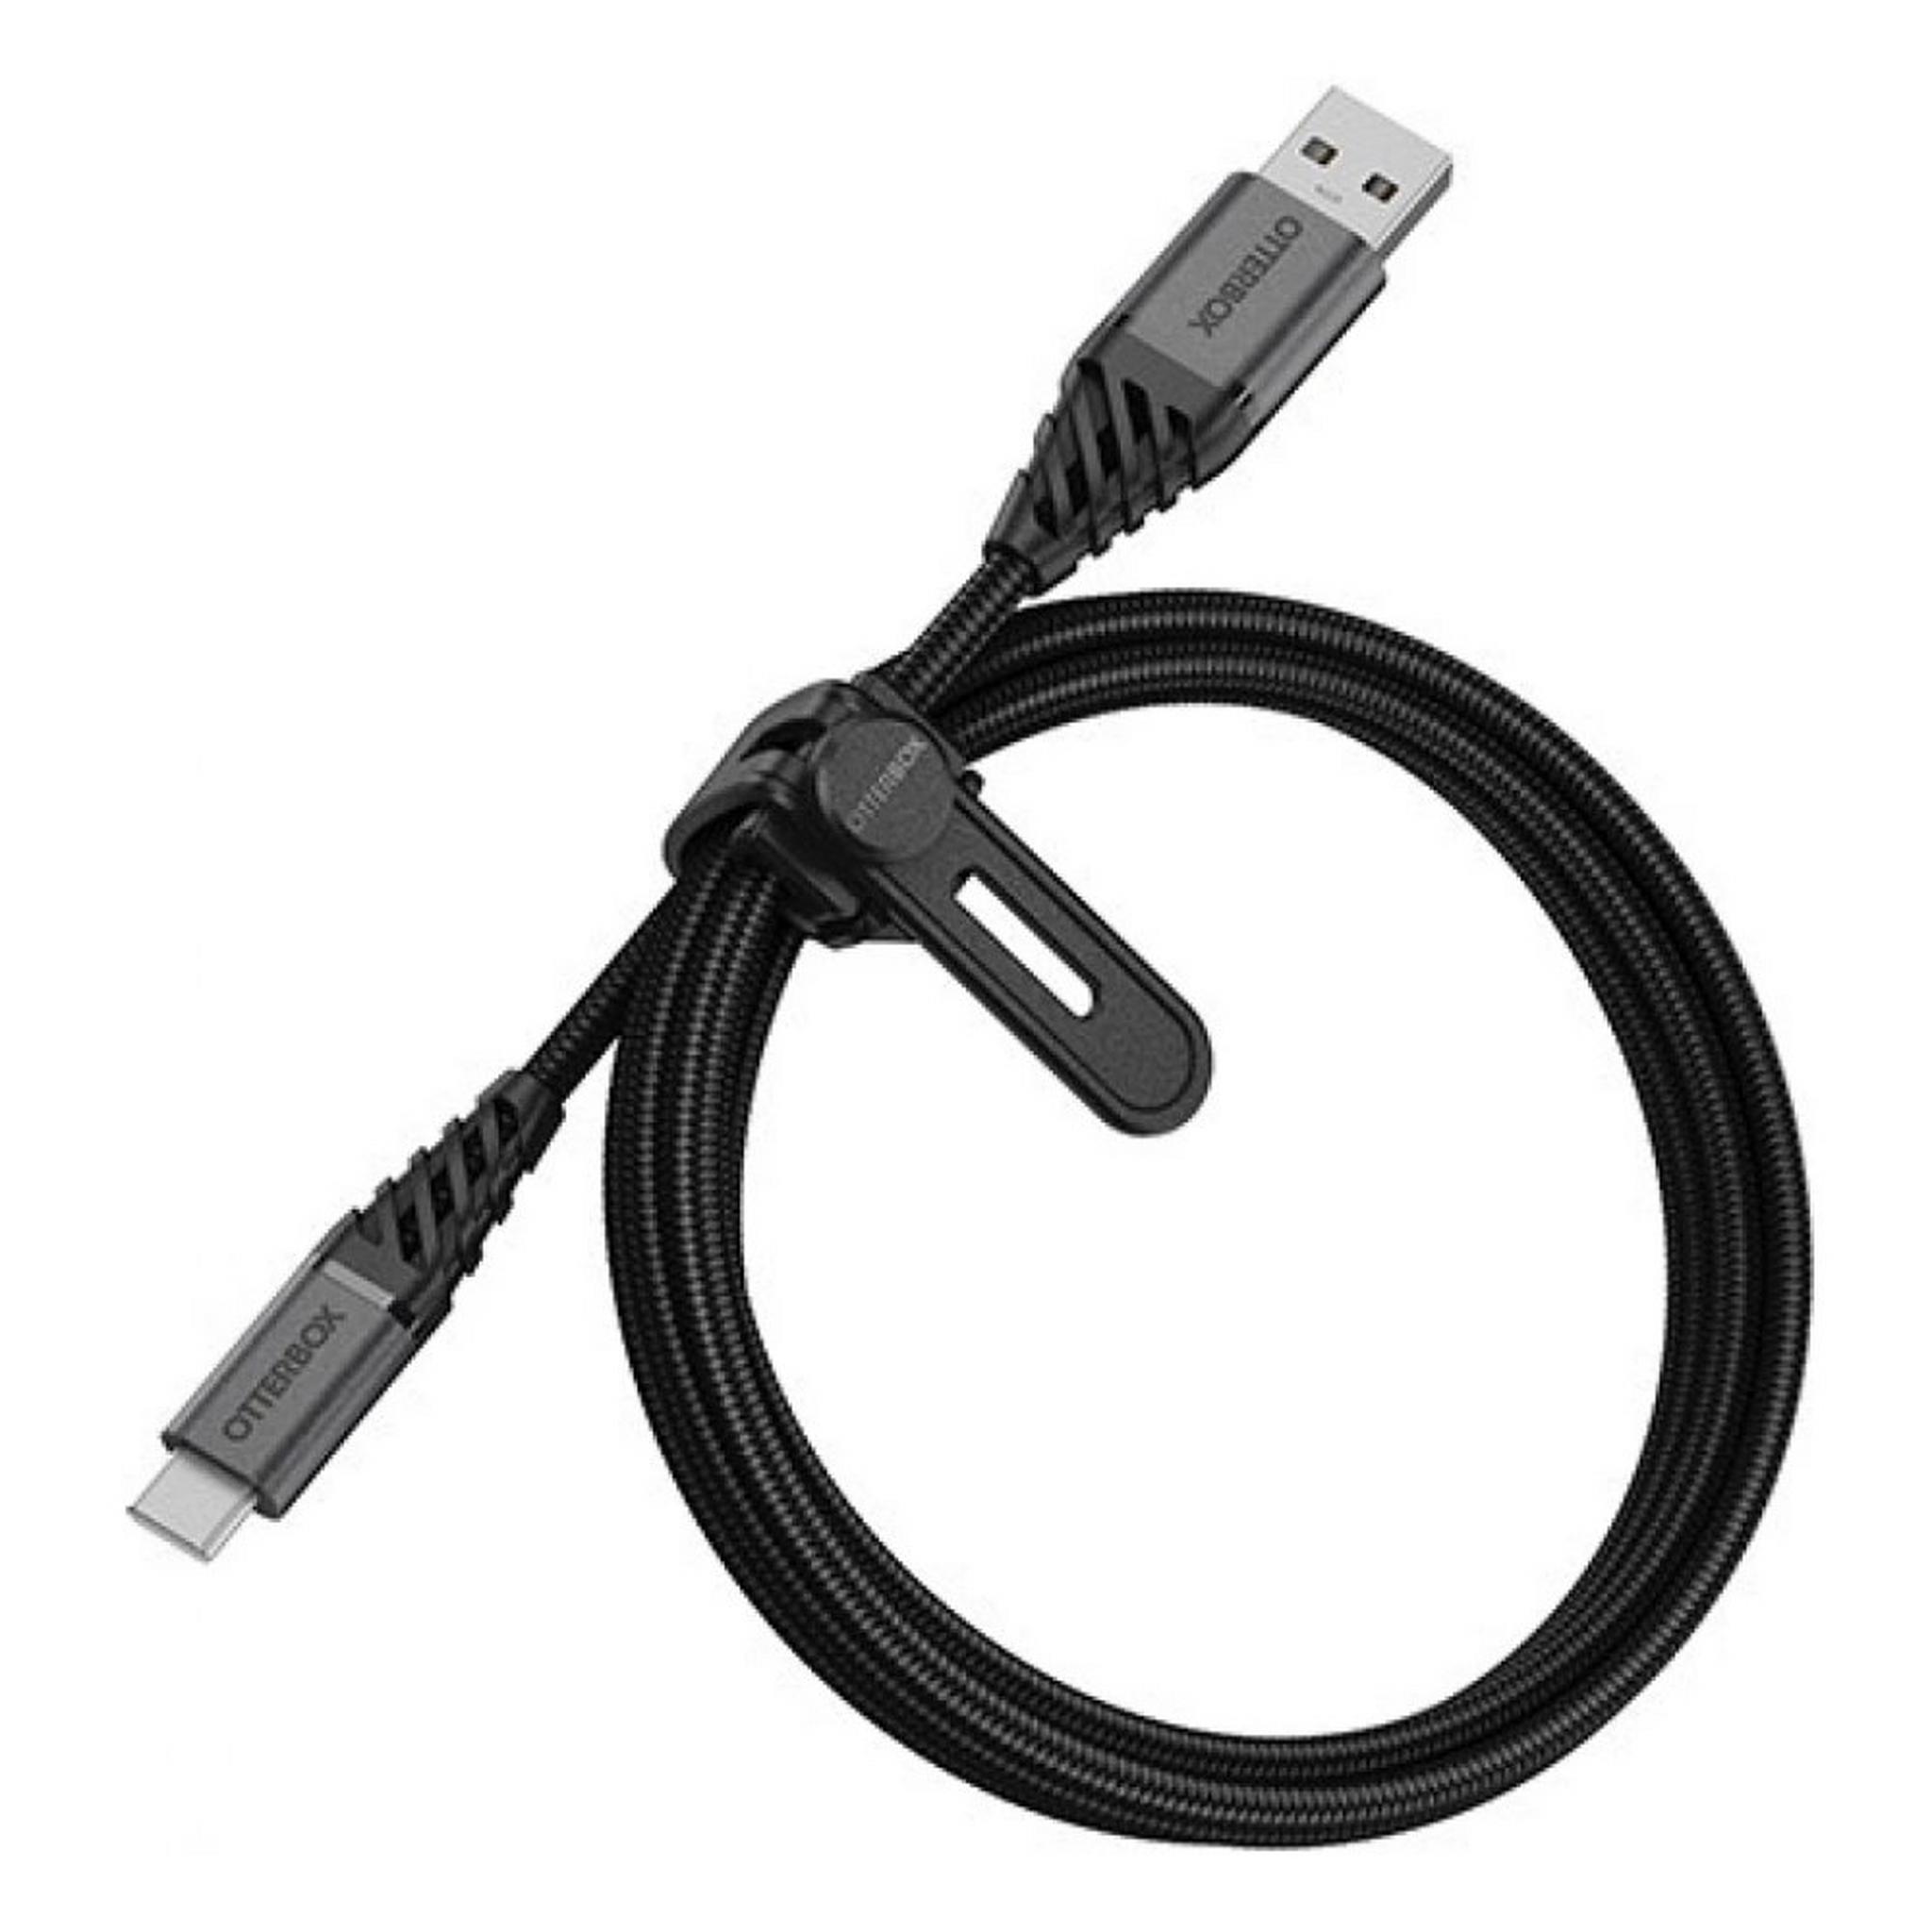 OtterBox Premium USB-A to USB-C Cable 3-Meter (78-52666)- Black